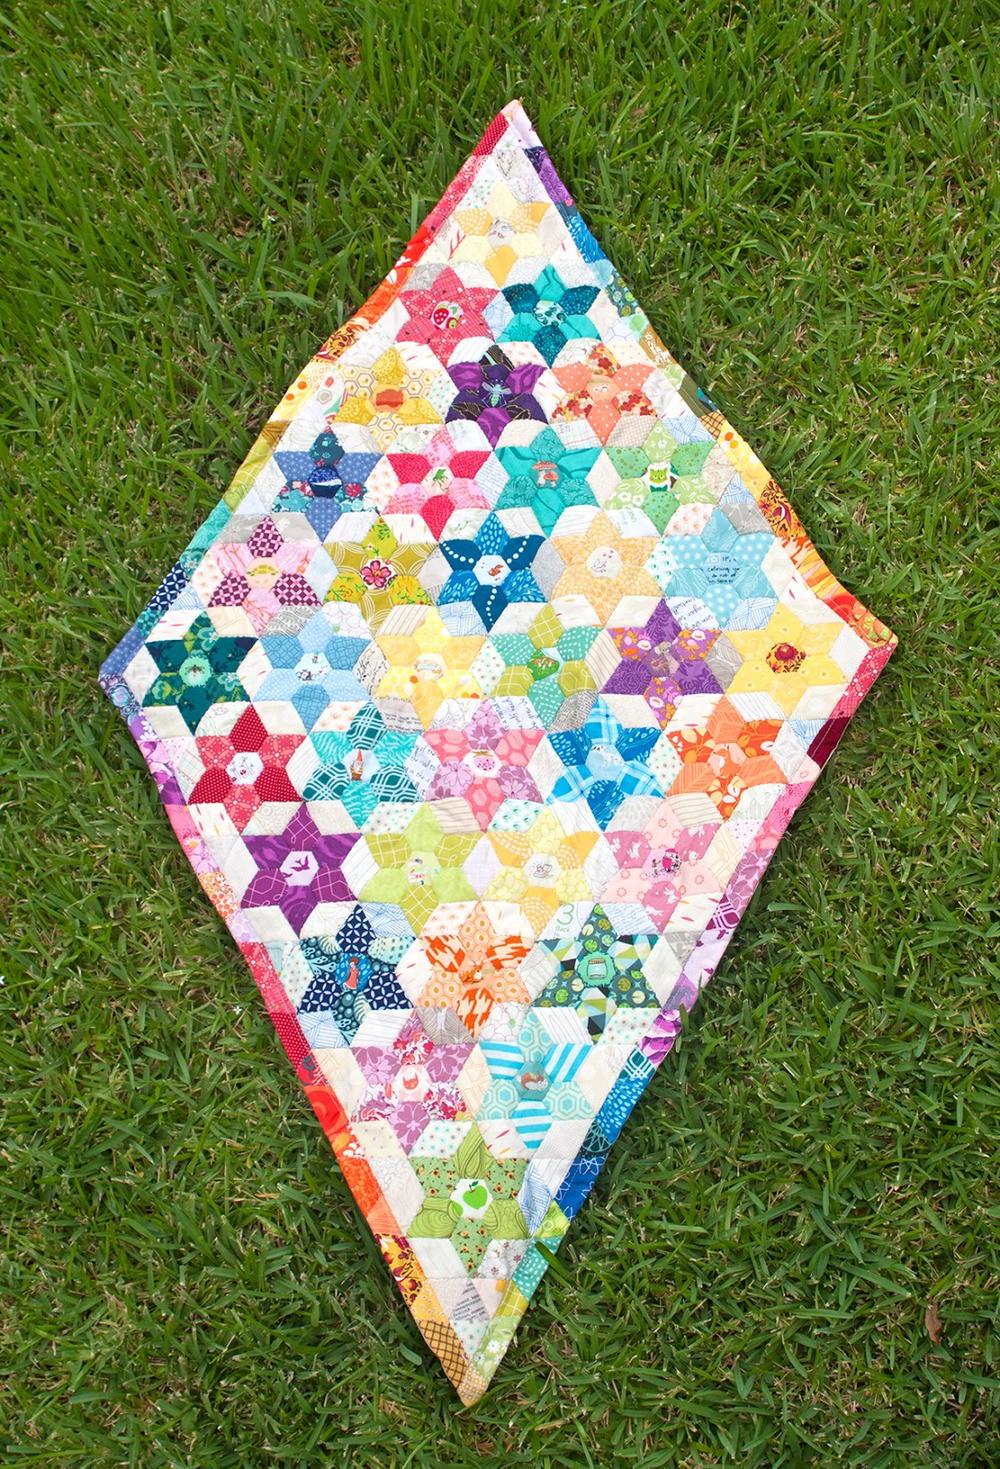 Diamond Triangle Quilt Pattern | FaveQuilts.com